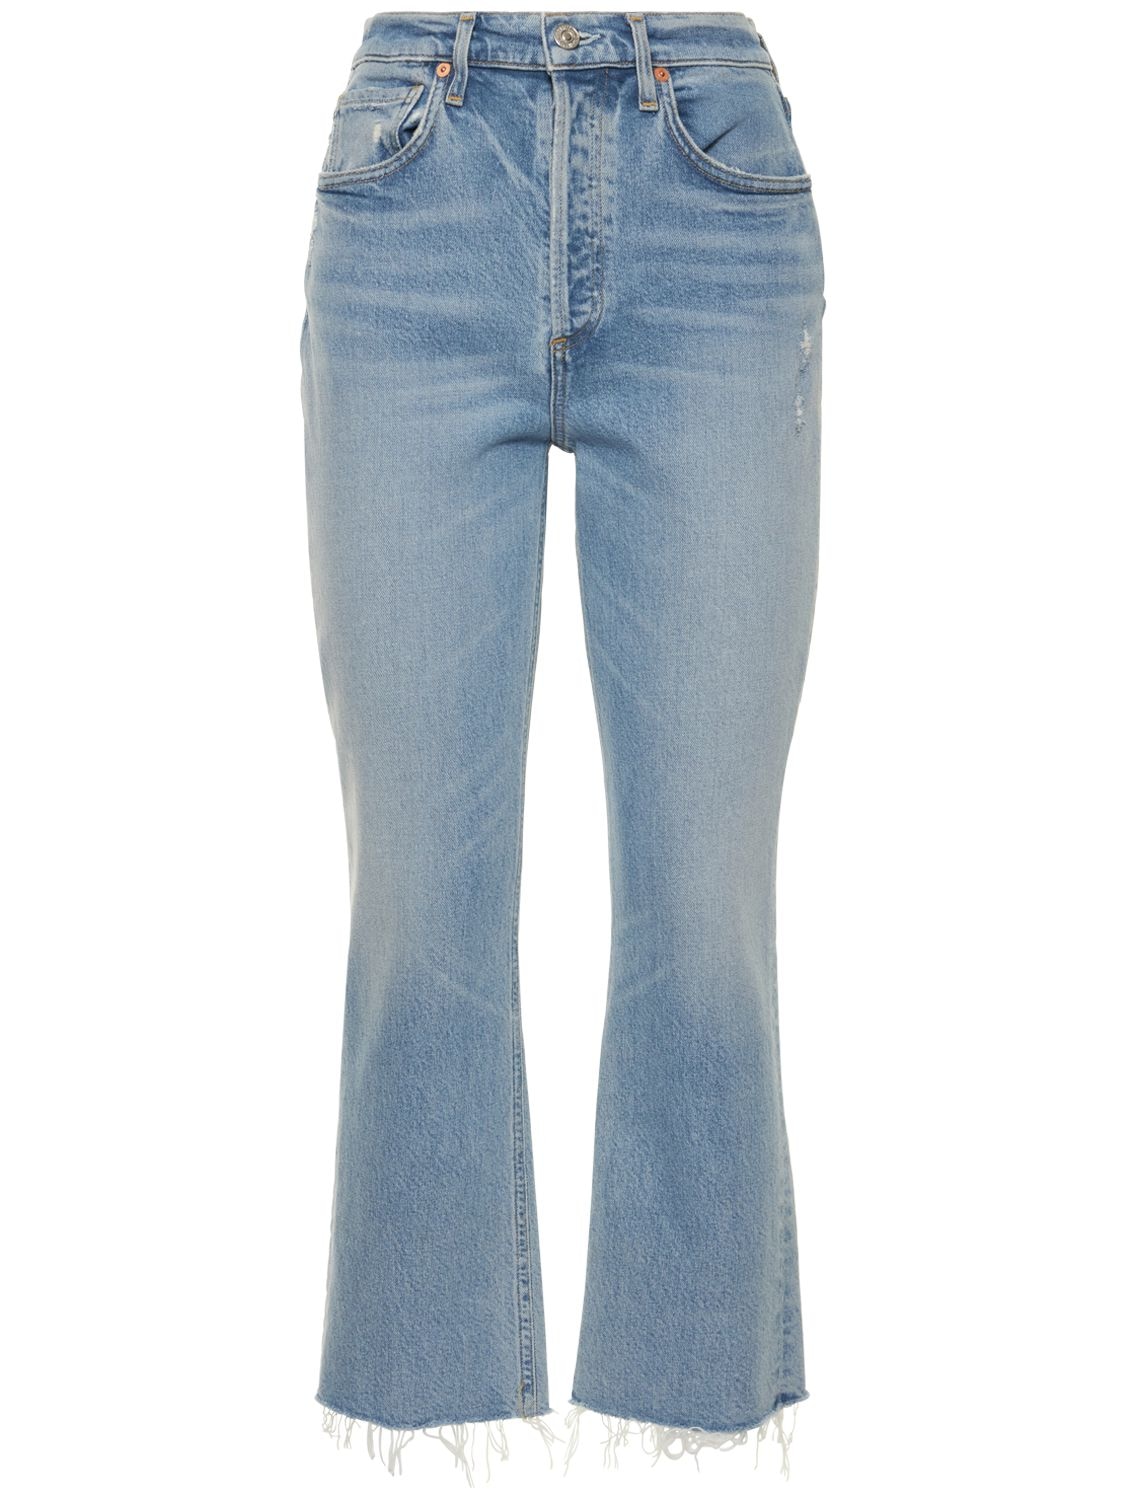 Isola Cropped Boot Cotton Jeans - CITIZENS OF HUMANITY - Modalova